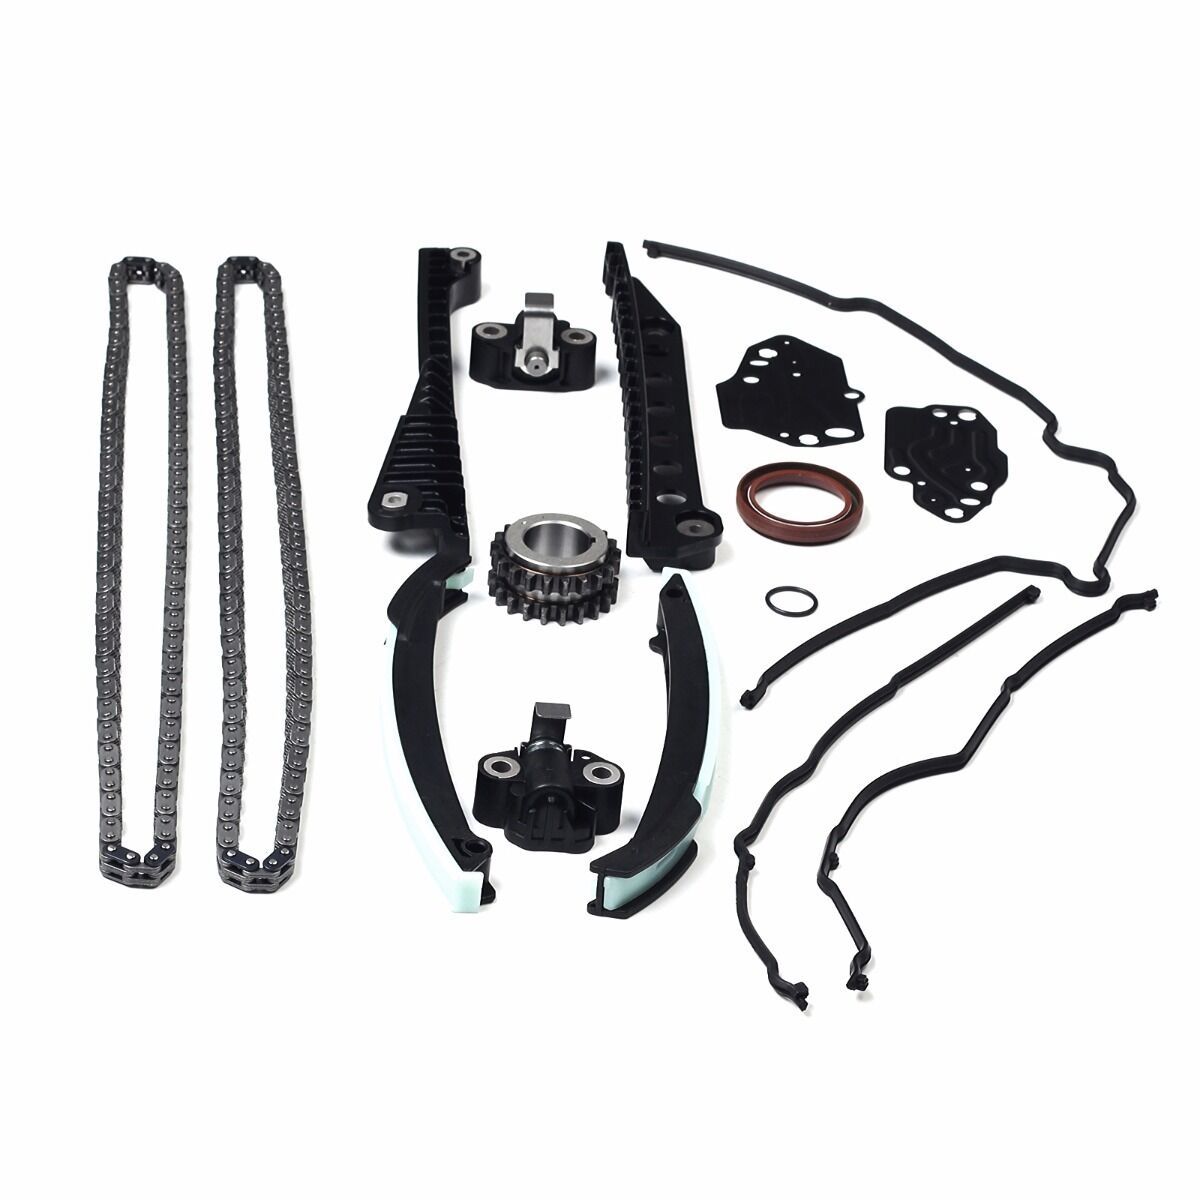 Timing Chain Kit+Cover Gaskets 04-08 For Ford F-150 F250 Lincoln 5.4L Triton 3V